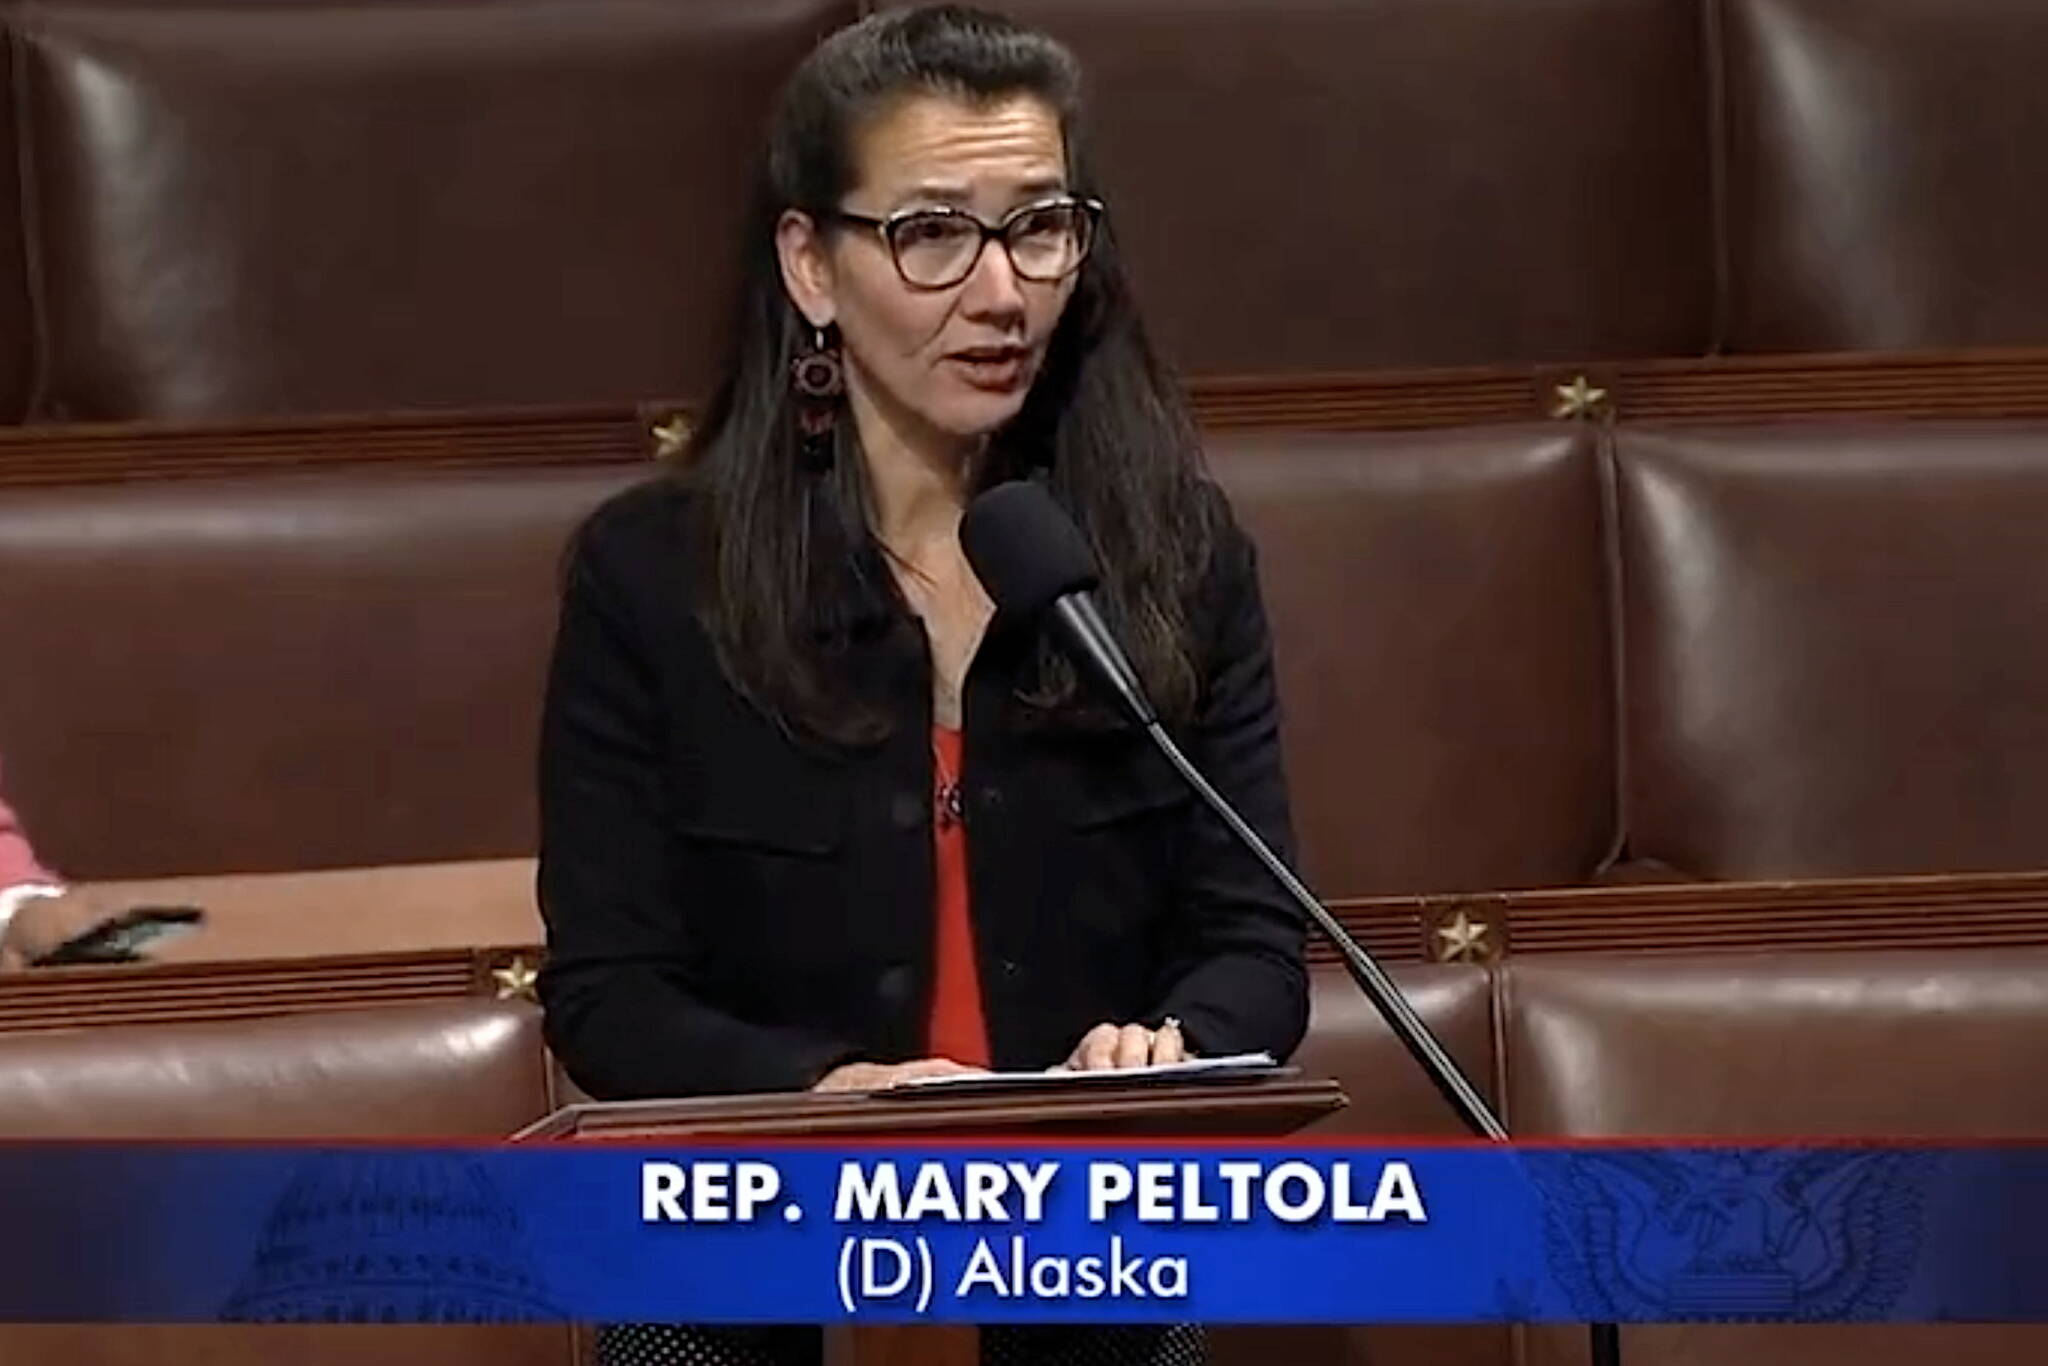 Screenshot from official U.S. House video
Rep. Mary Peltola, an Alaska Democrat, delivers a speech on the U.S. House floor before Thursday’s vote approving her first bill, establishing an Office of Food Security in the Department of Veterans Affairs. It passed the House by a 376-49 vote, although its fate in the Senate is undetermined.